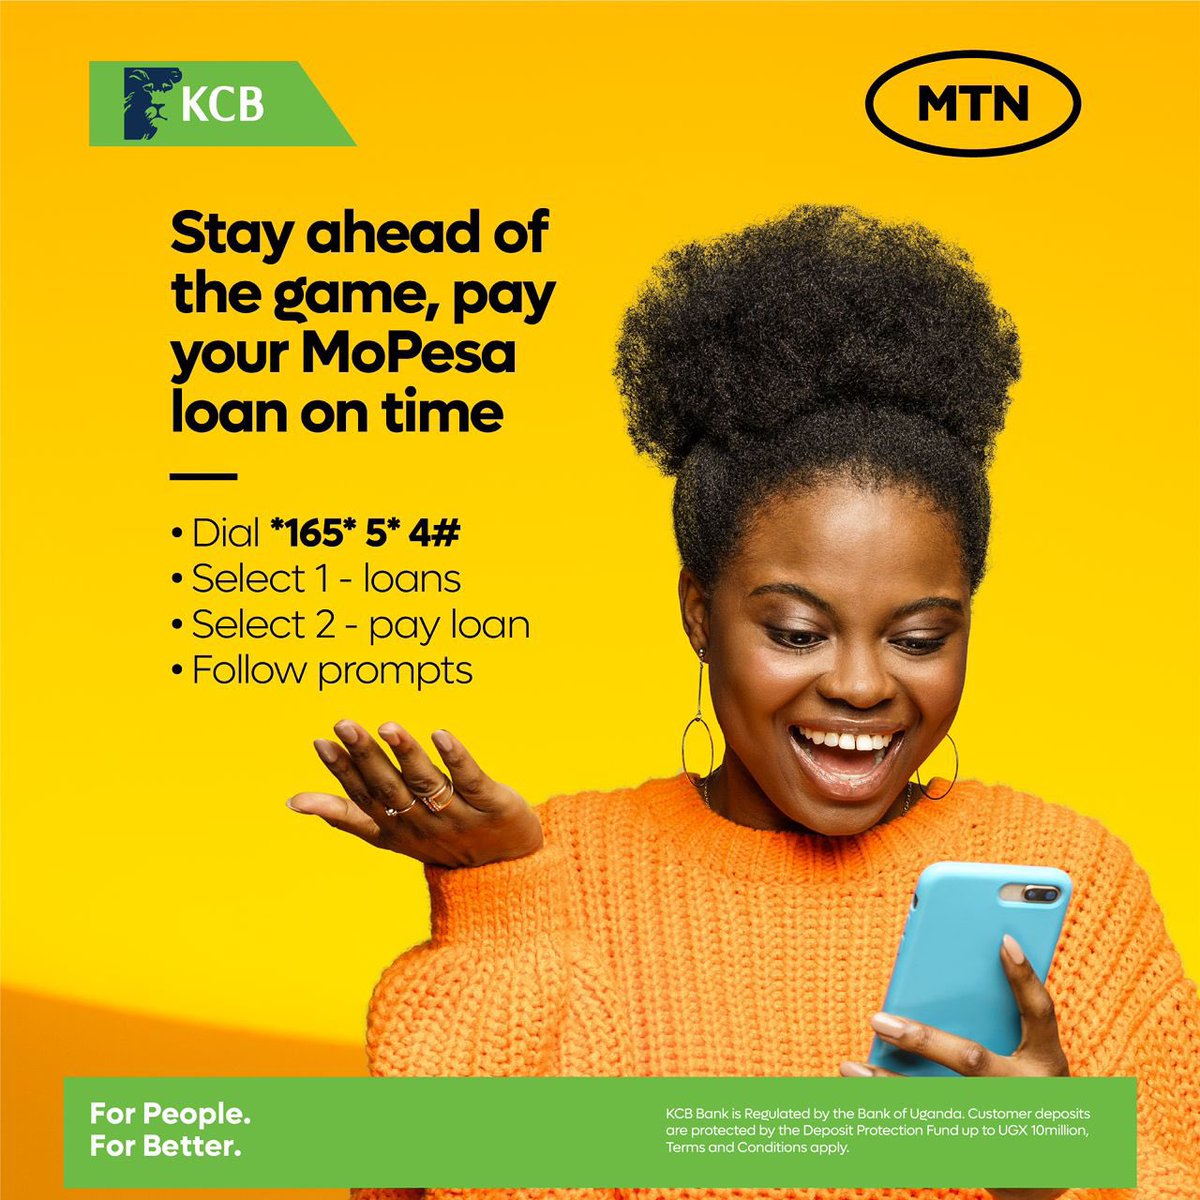 Here is how to pay your MoPesa loan 😎 #ForPeopleForBetter